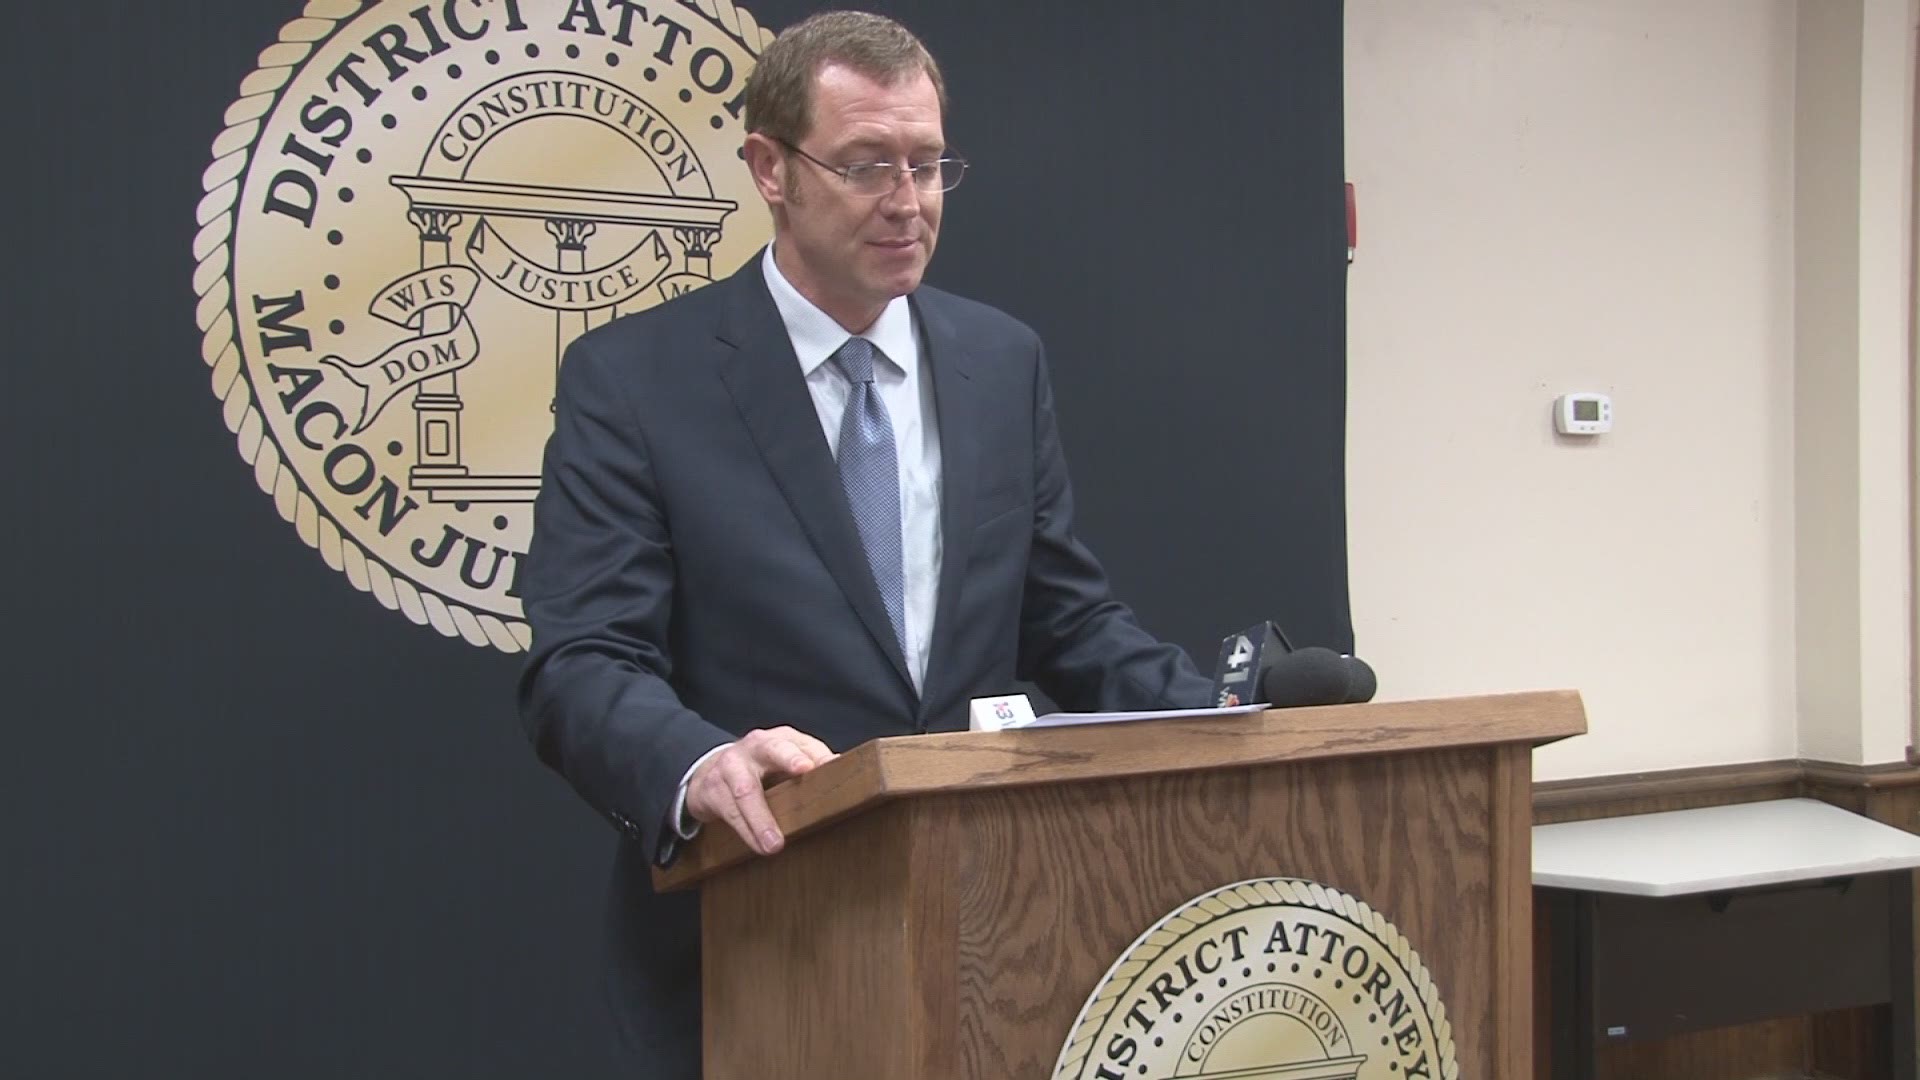 District Attorney David Cooke announces more than a dozen charges against 7 people in connection with a prostitution and pimping scandal at FVSU in Georgia